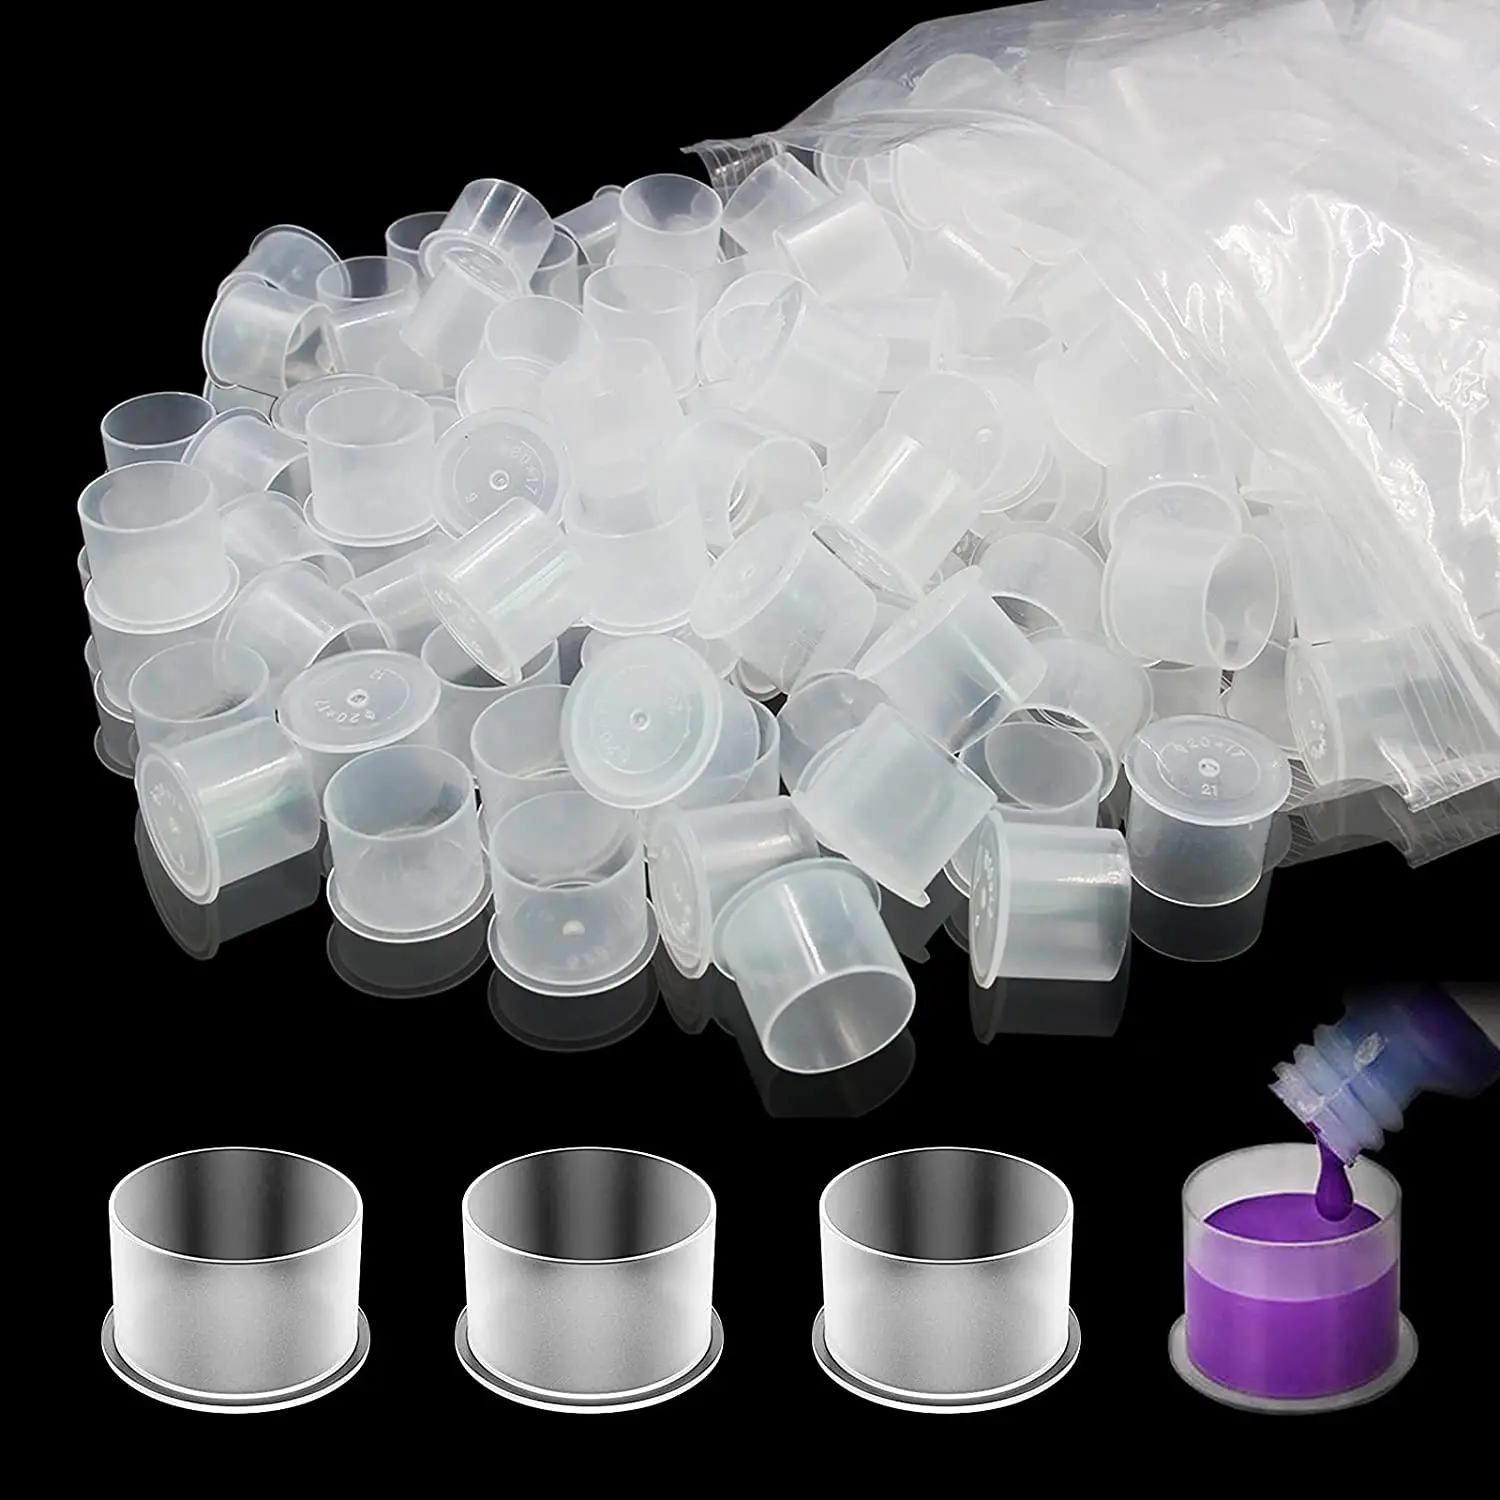 1000pcs plastic tattoo ink cups caps 17mm 14mm 11mm clear self standing ink caps tattoo pigment cups supply for ink free global shipping